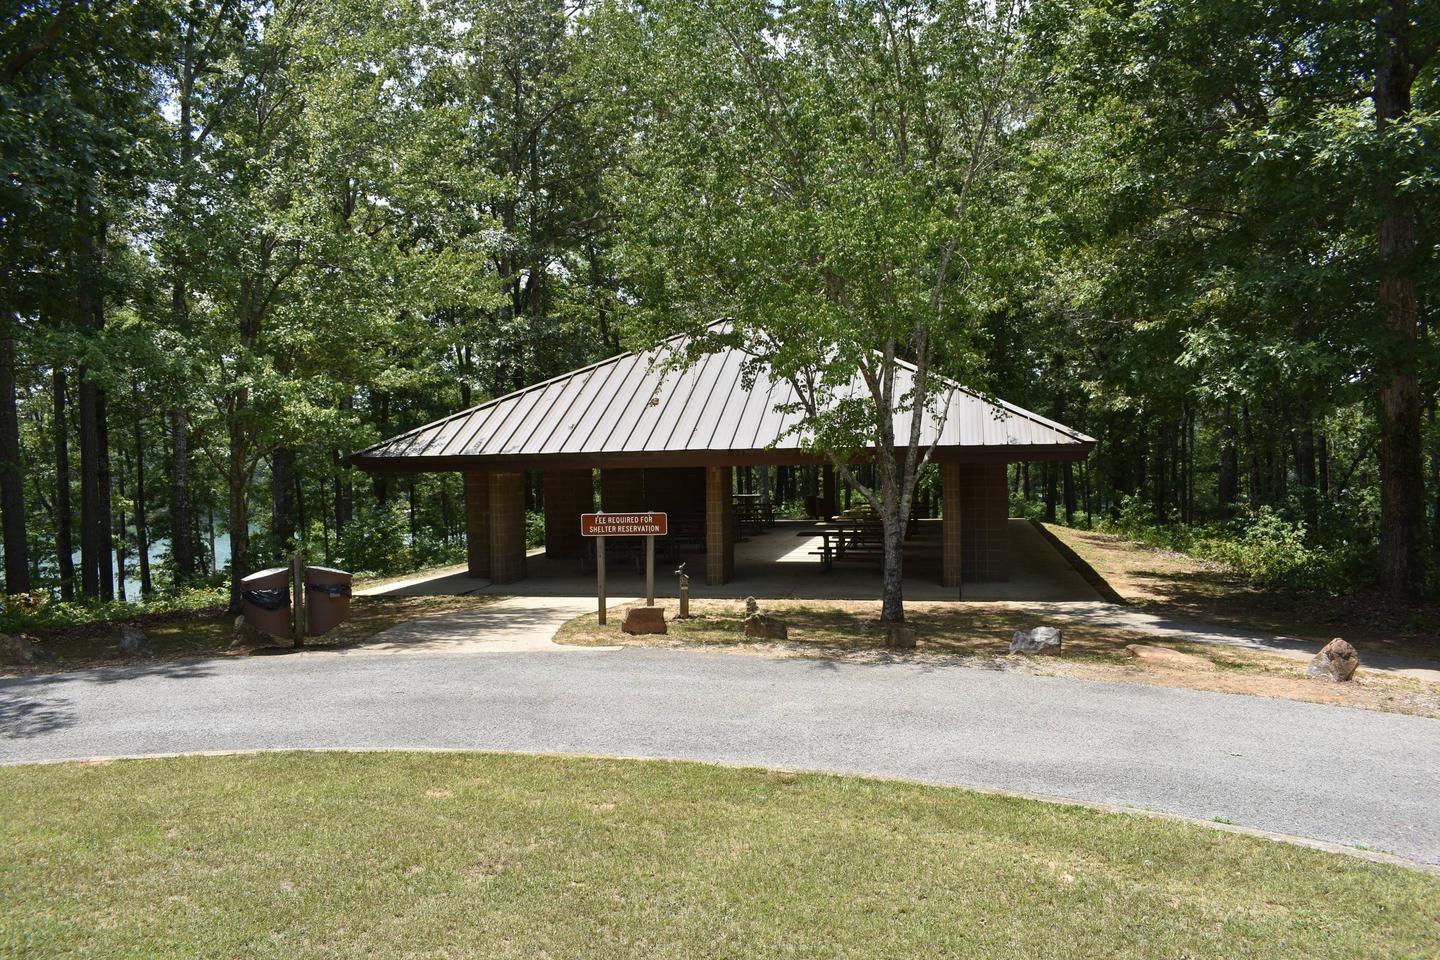 Corinth Recreation Area Day Use Picnic Pavilion1Corinth Recreation Area Day Use Picnic Pavilion
July 10th, 2019